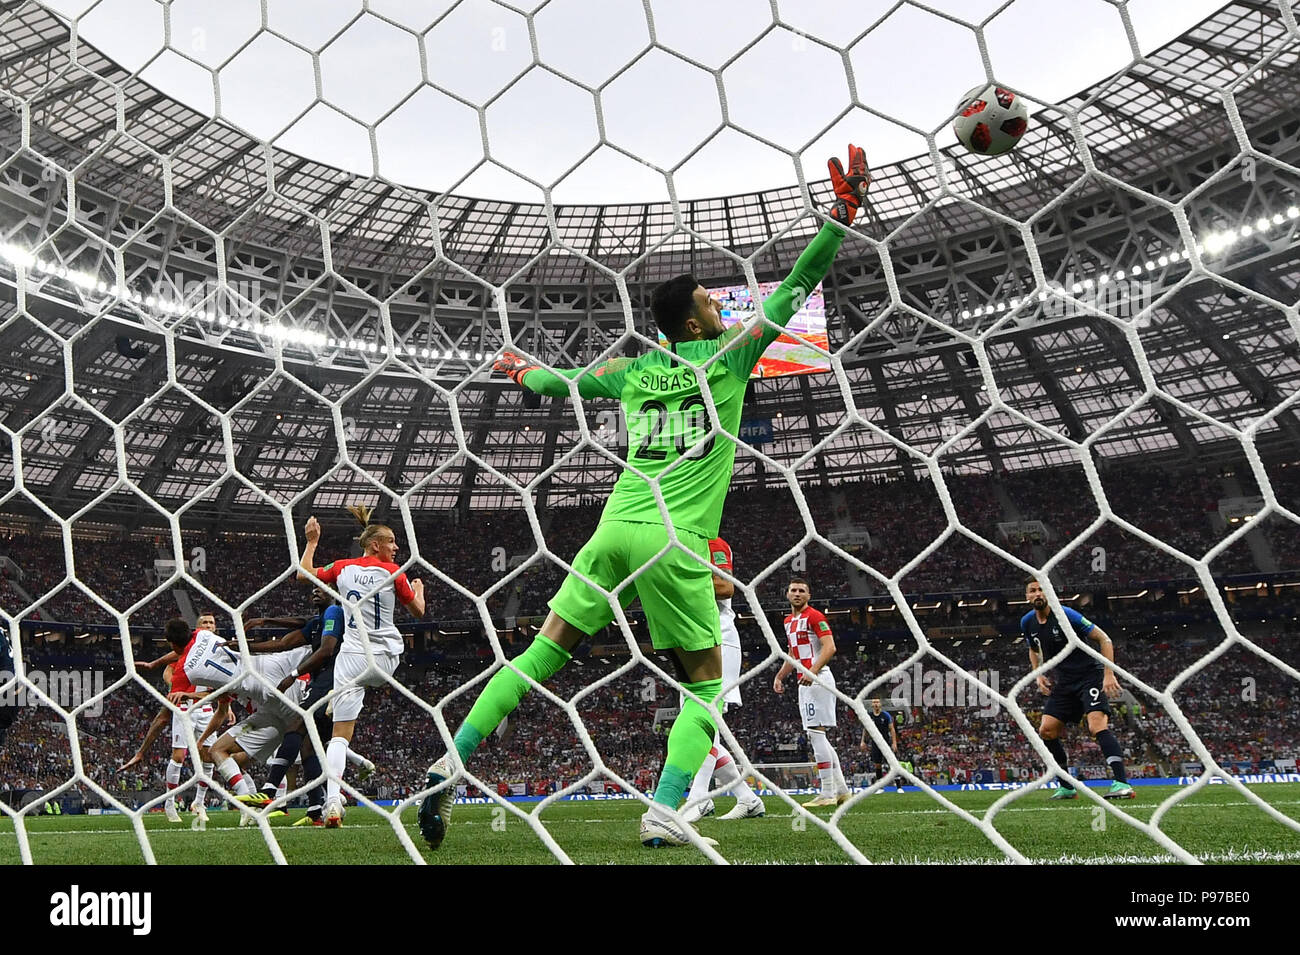 (180715) -- MOSCOW, July 15, 2018 (Xinhua) -- Goalkeeper Danijel Subasic (front) of Croatia fails to save the ball during the 2018 FIFA World Cup final match between France and Croatia in Moscow, Russia, July 15, 2018. (Xinhua/Liu Dawei) Stock Photo